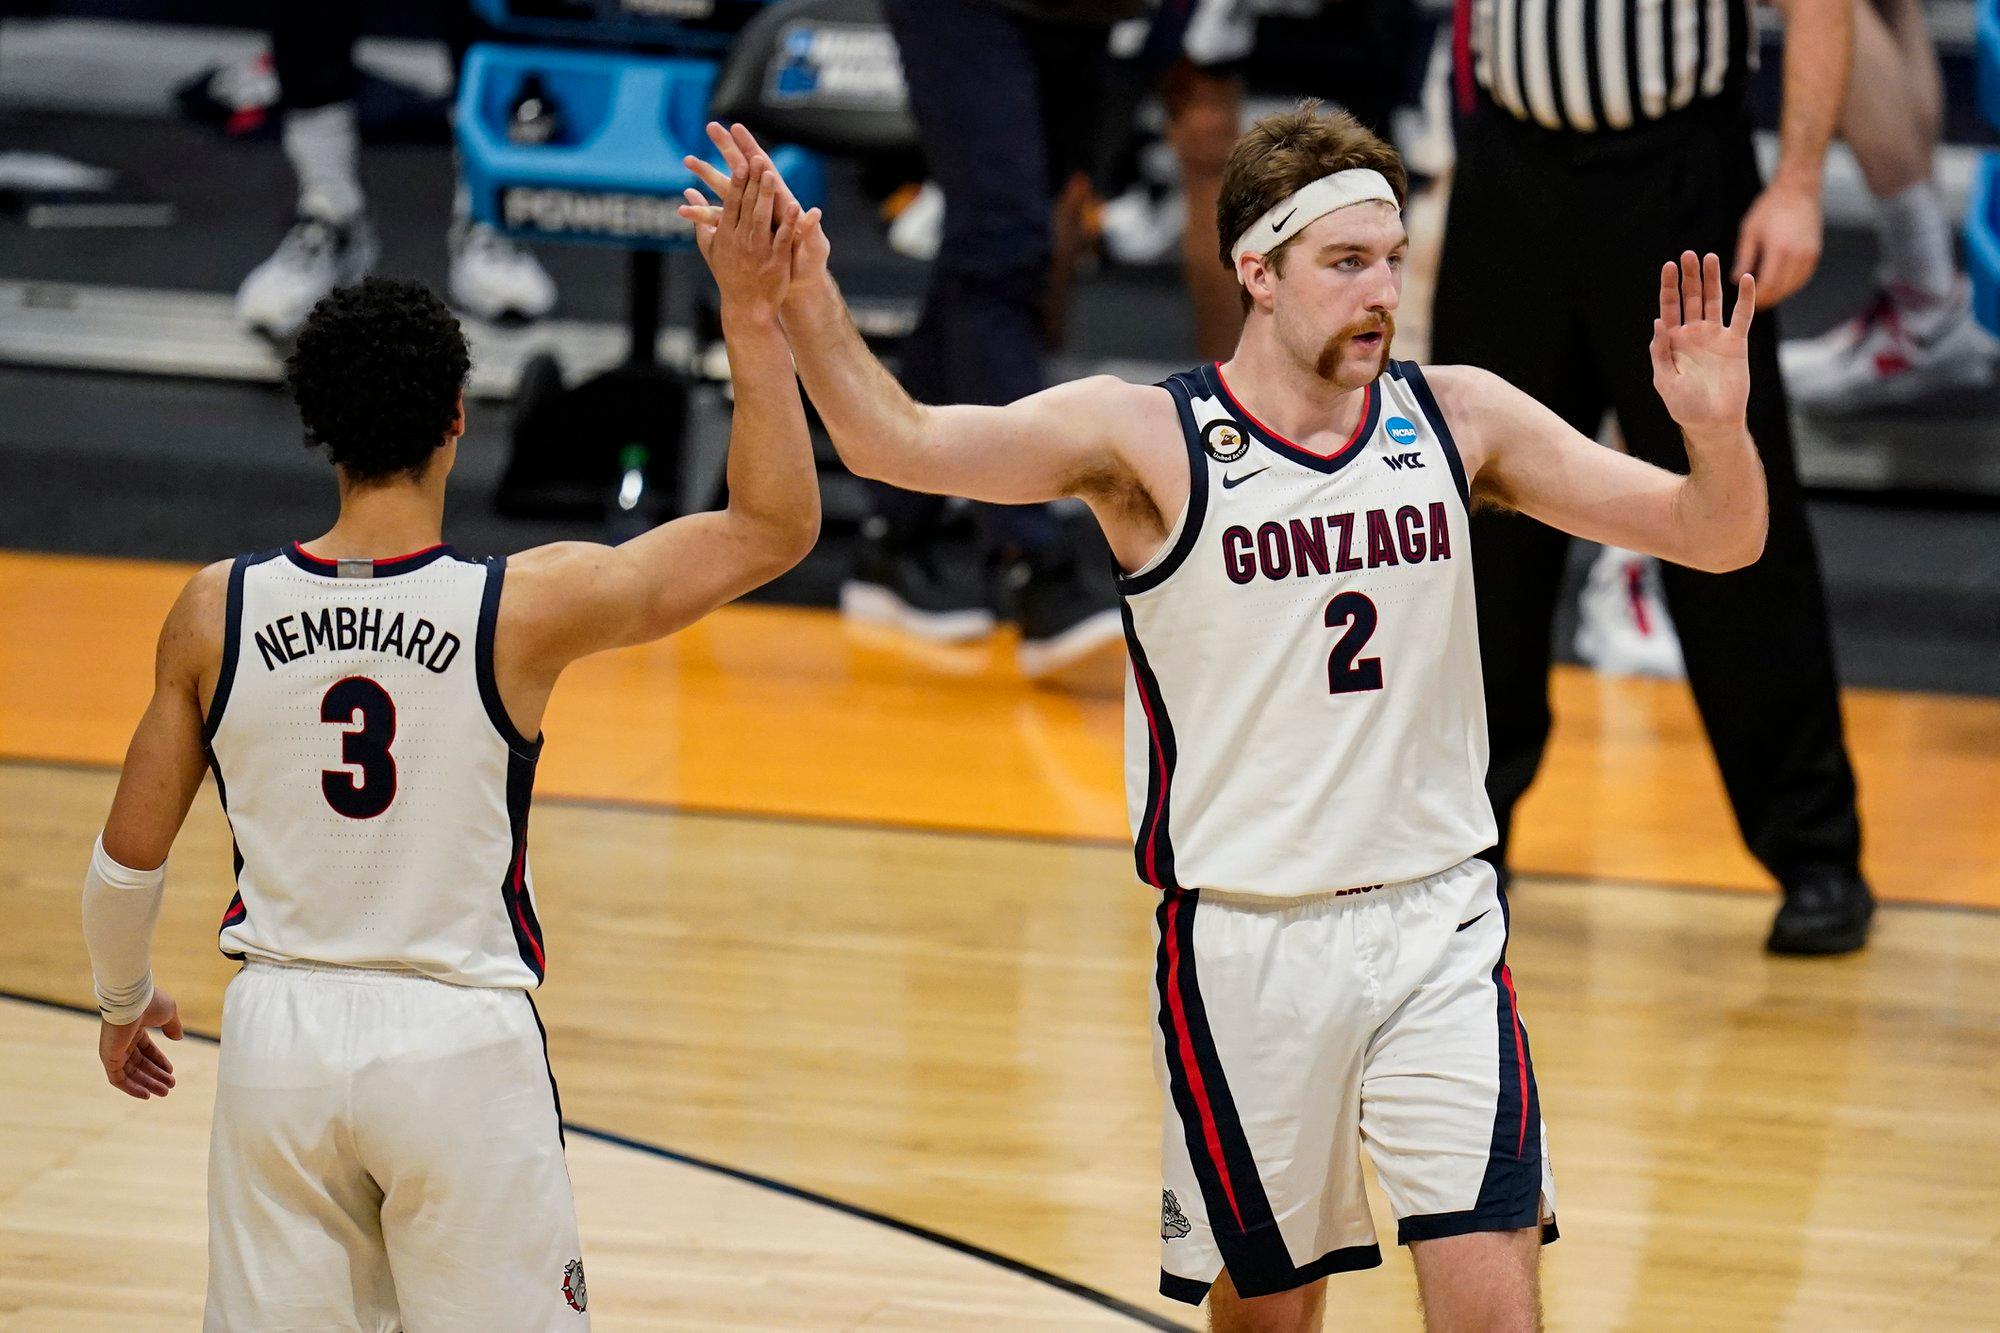 Gonzaga forward Drew Timme (2) celebrates with guard Andrew Nembhard (3) in the second half of a second-round game against Oklahoma in the NCAA men's college basketball tournament at Hinkle Fieldhouse in Indianapolis, Monday, March 22, 2021. (AP Photo/Michael Conroy)